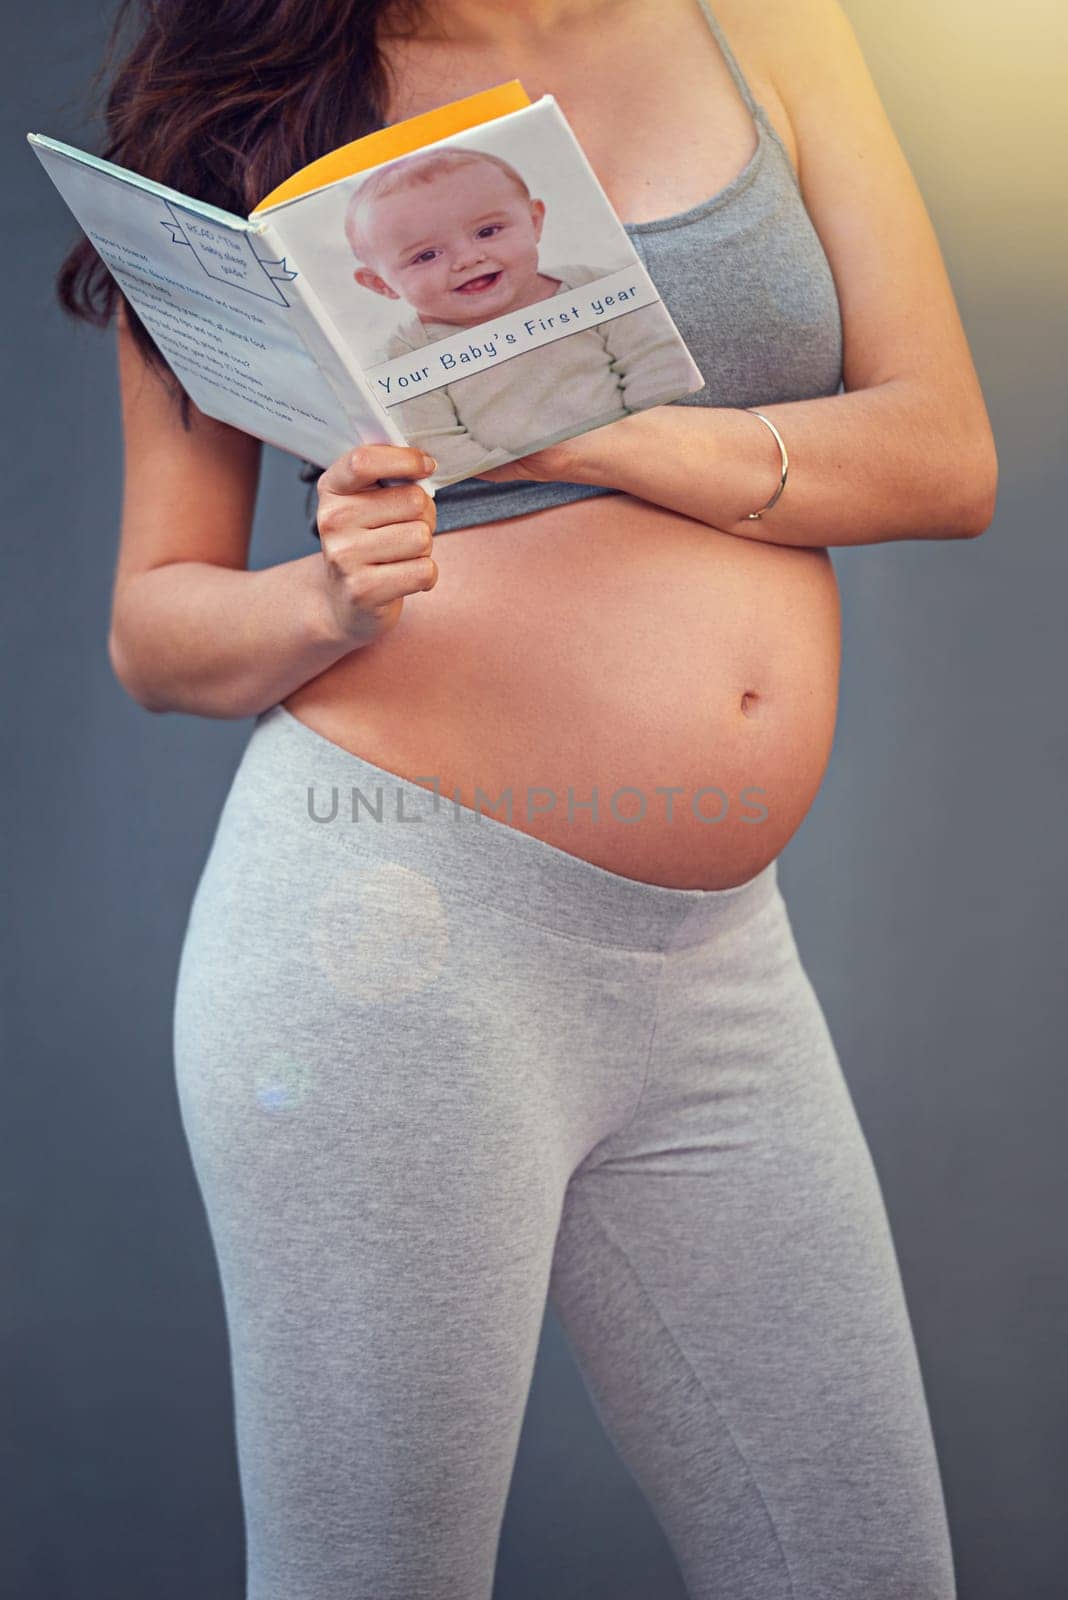 Pregnant woman, baby book and belly in studio for maternity and prenatal wellness for pregnancy and motherhood. Young person, happy and isolated with growing stomach or read for childbirth well being.